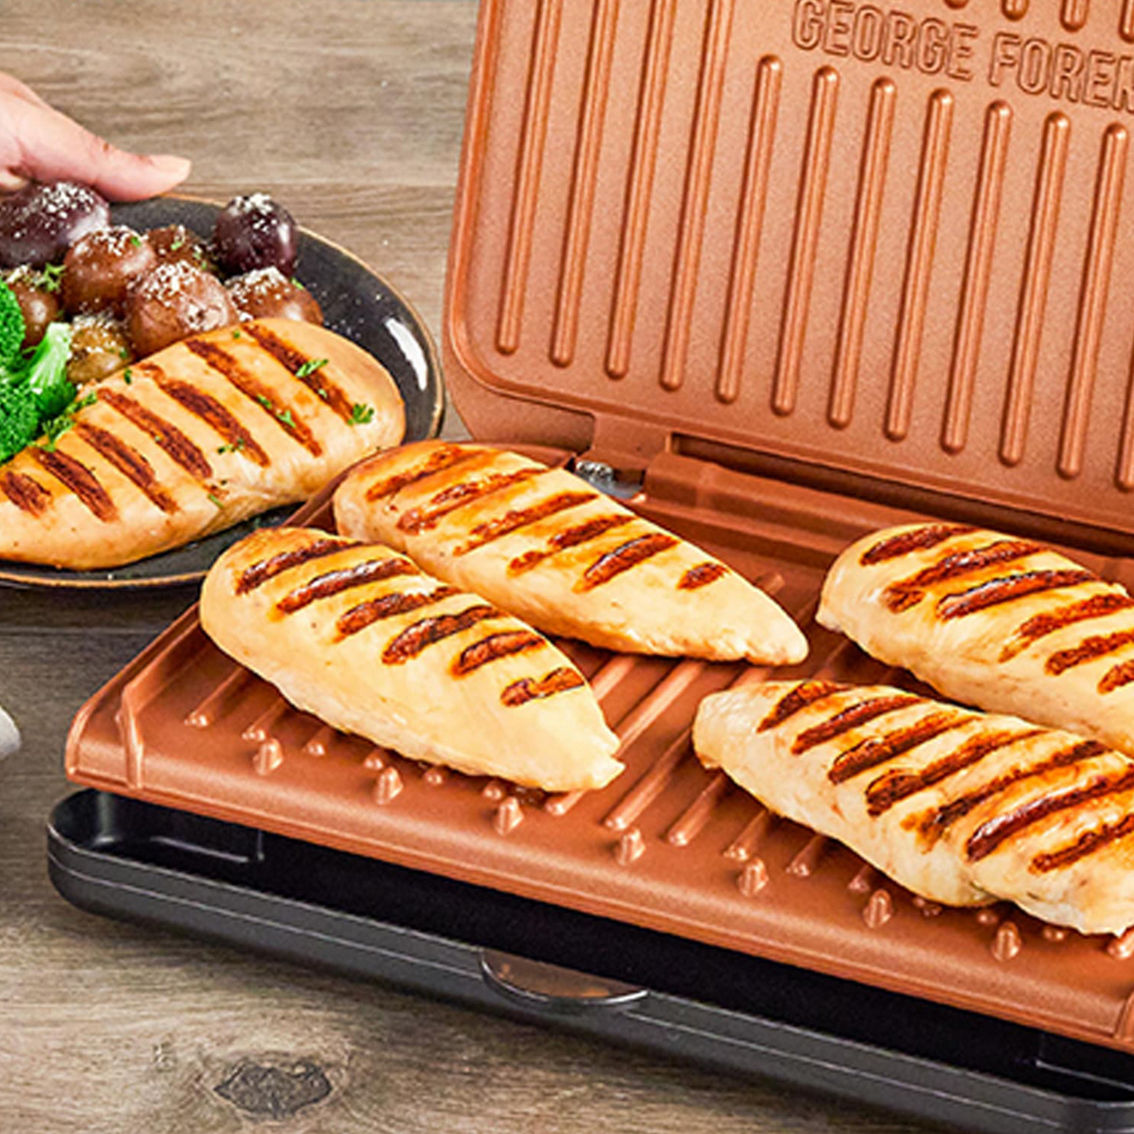 George Foreman Family Size 5 Serving Nonstick Compact Electric Indoor Grill in B - Image 3 of 5